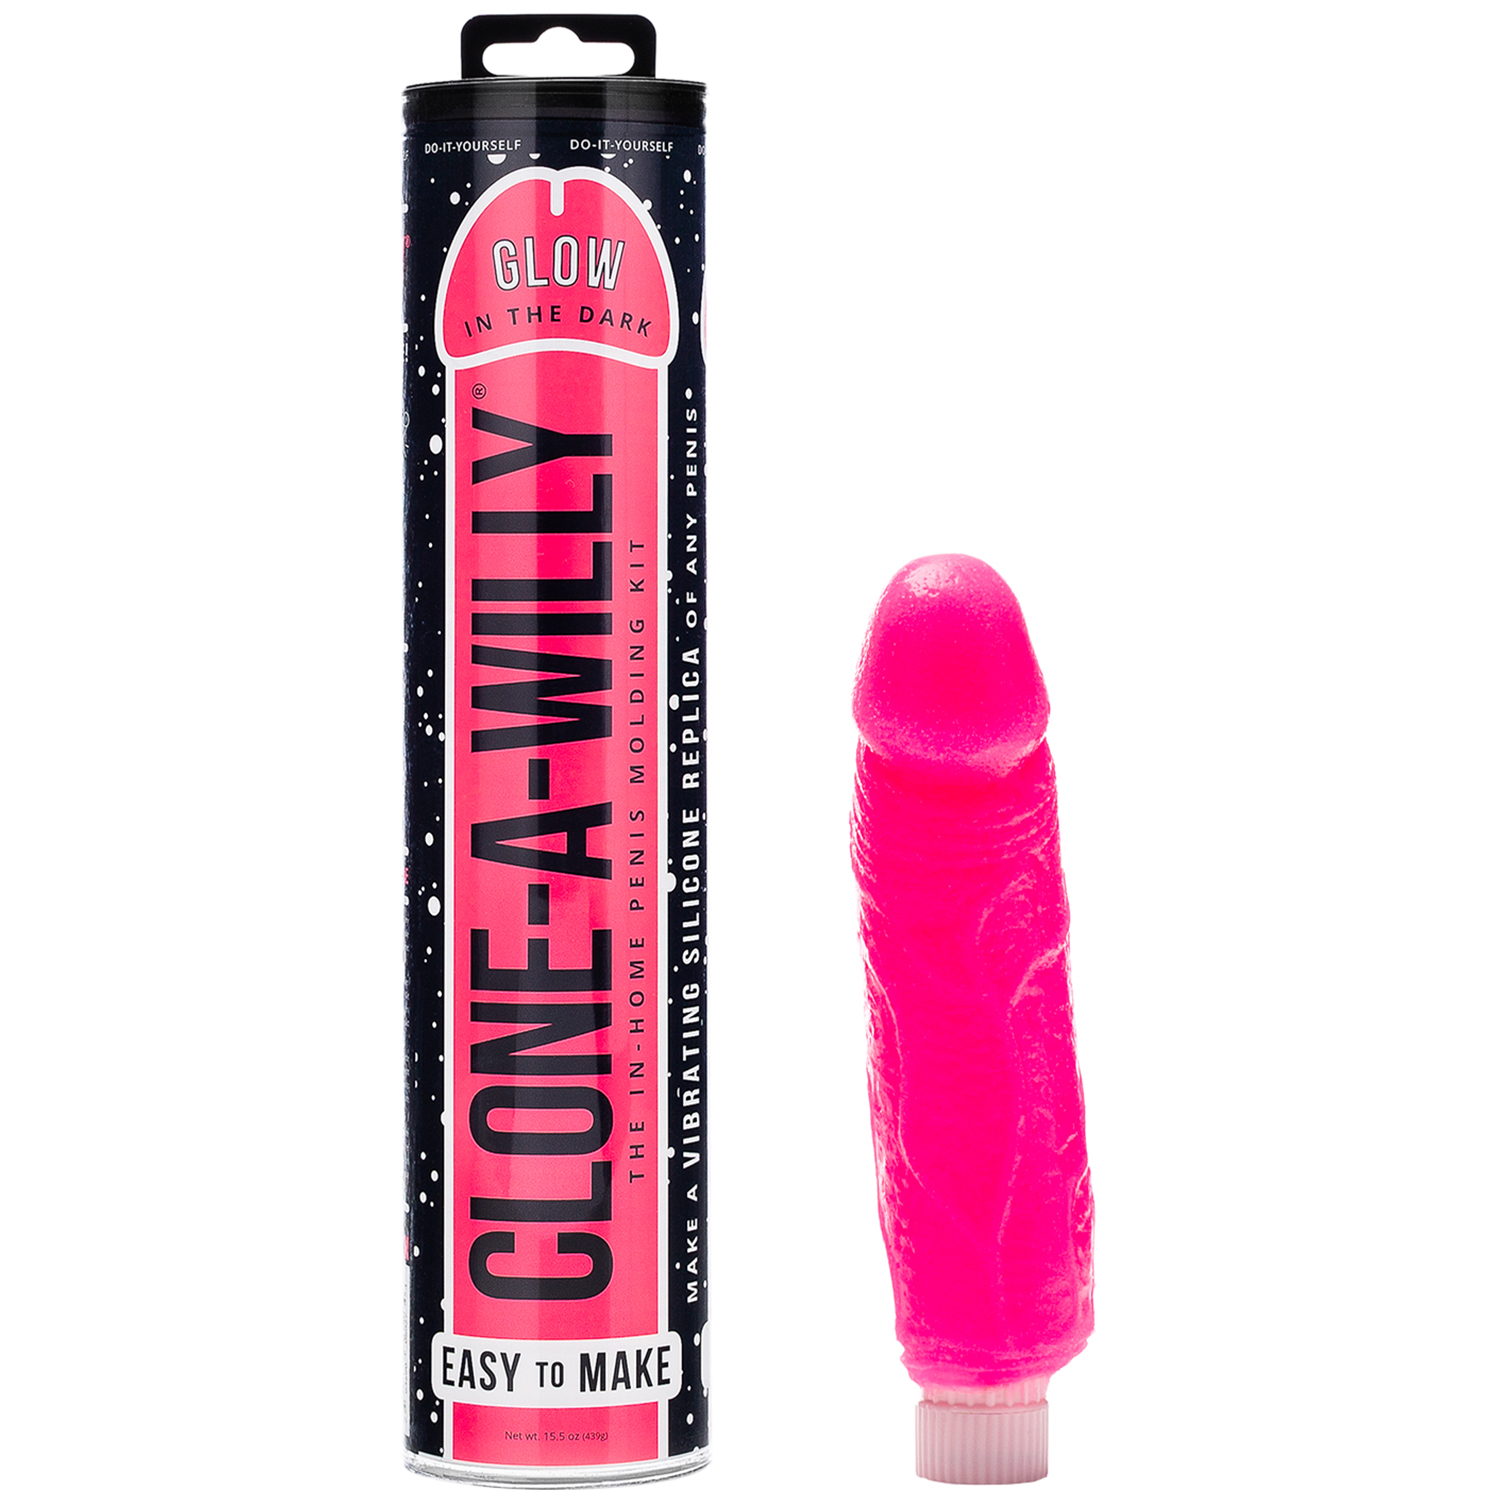 Clone-A-Willy DIY Homemade Dildo Clone Kit Glow In The Dark Pink photo image